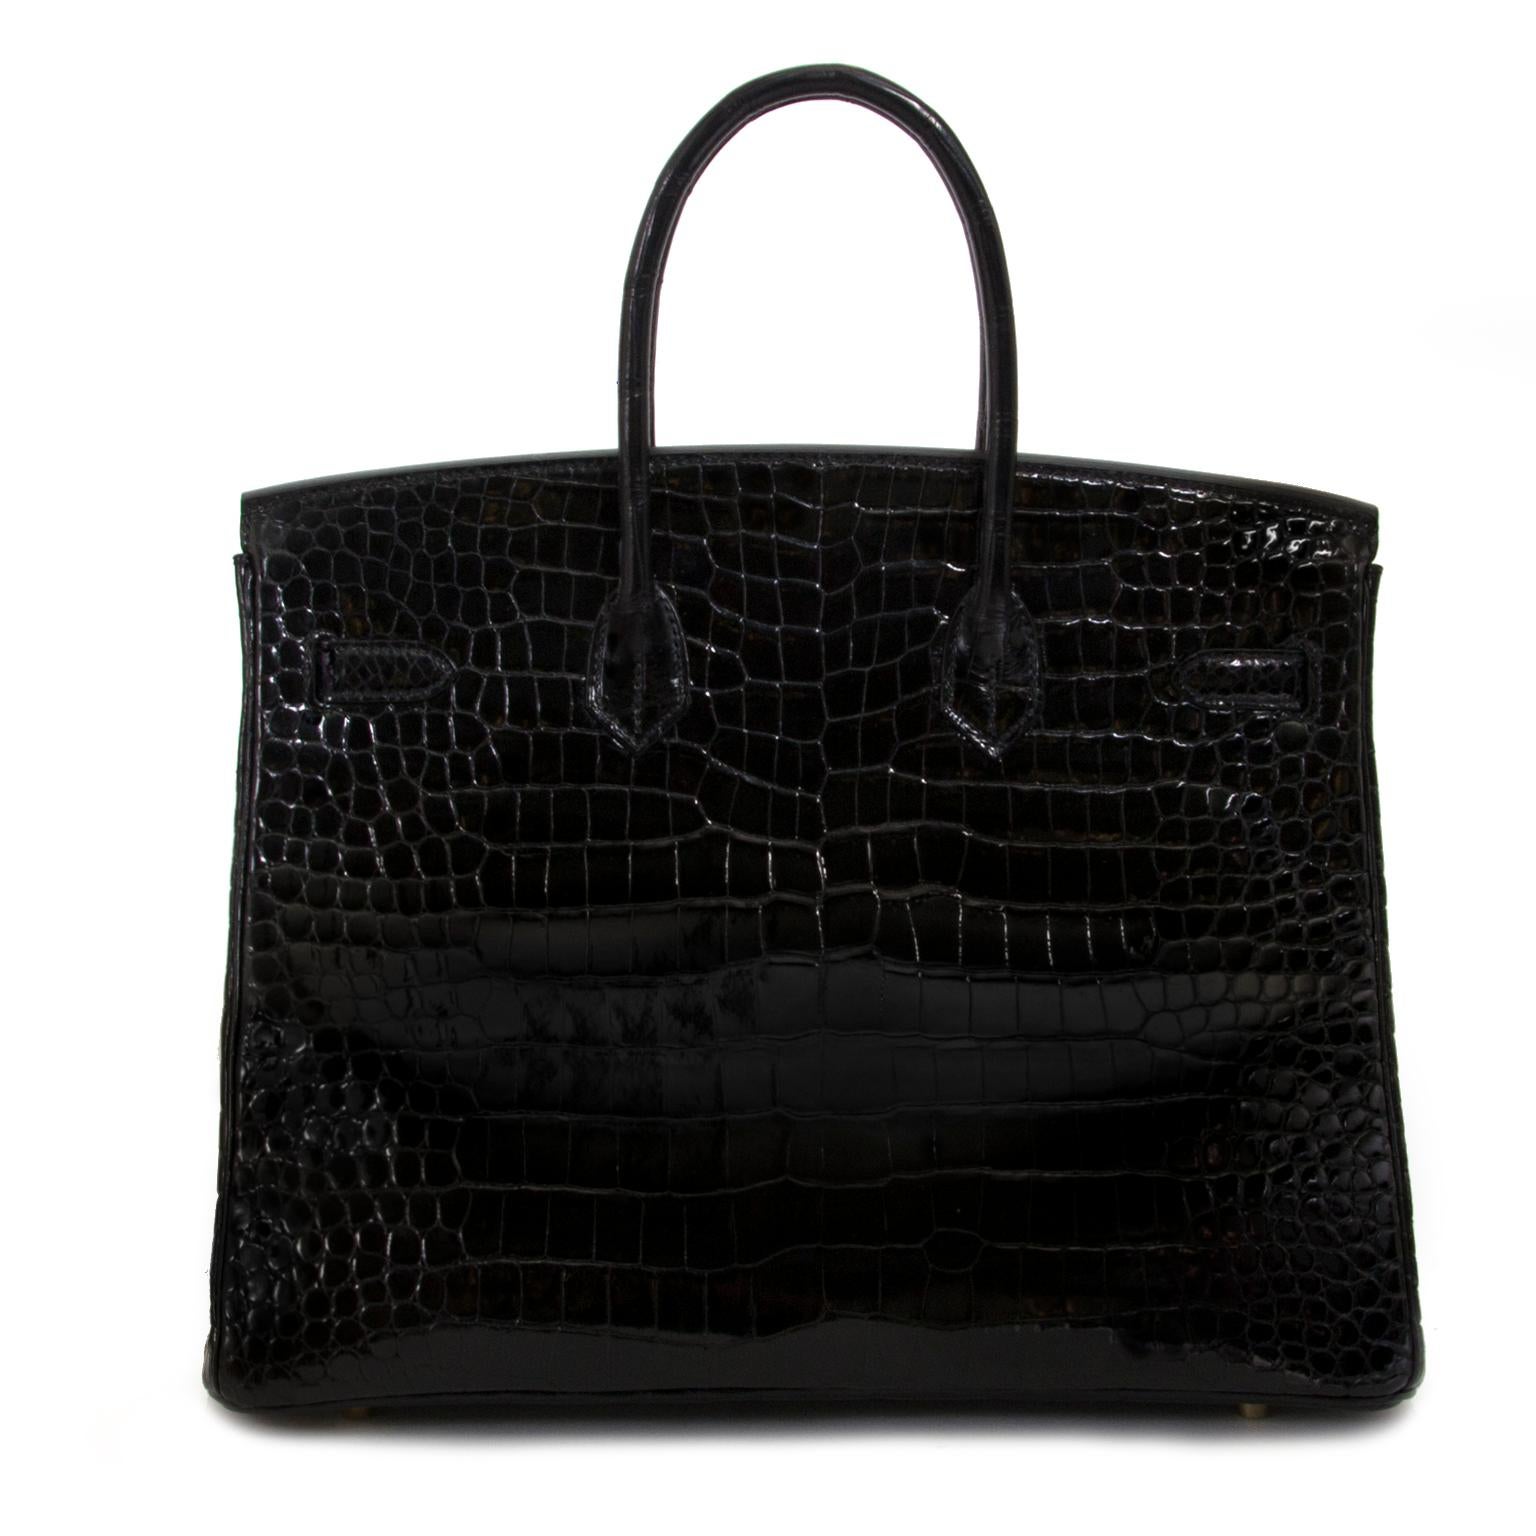 Hermès Birkin 35 Crocodile Porosus Black GHW
Get yourself the most exclusive crocodile bag in the world with this Hermès Birkin. As one of the rarest Hermès bags on the market, it holds a lot of value.
Hermès Birkin bag 35cm in black color and shiny